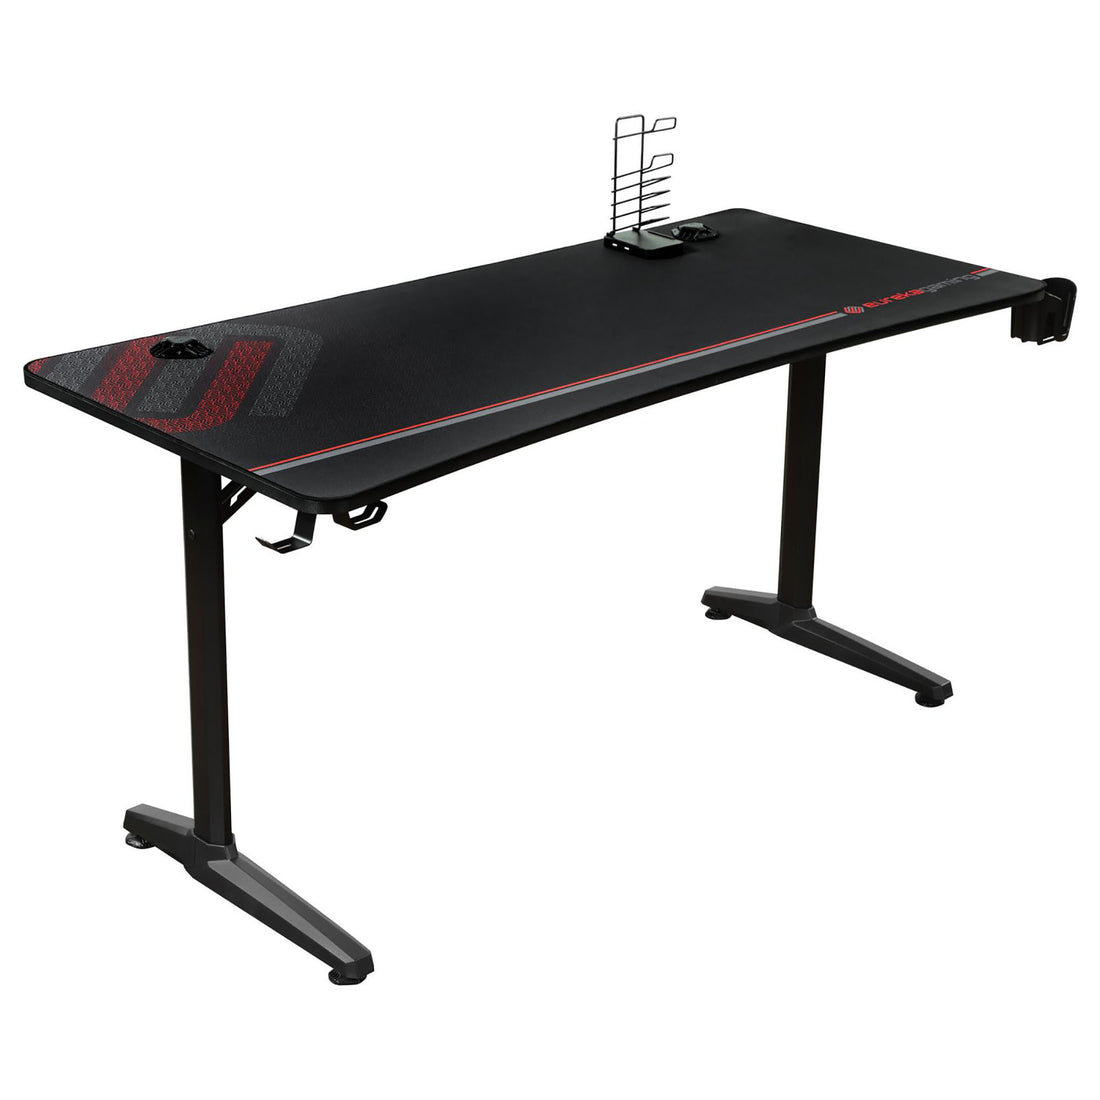 Black Gaming Desk with Usb Ports